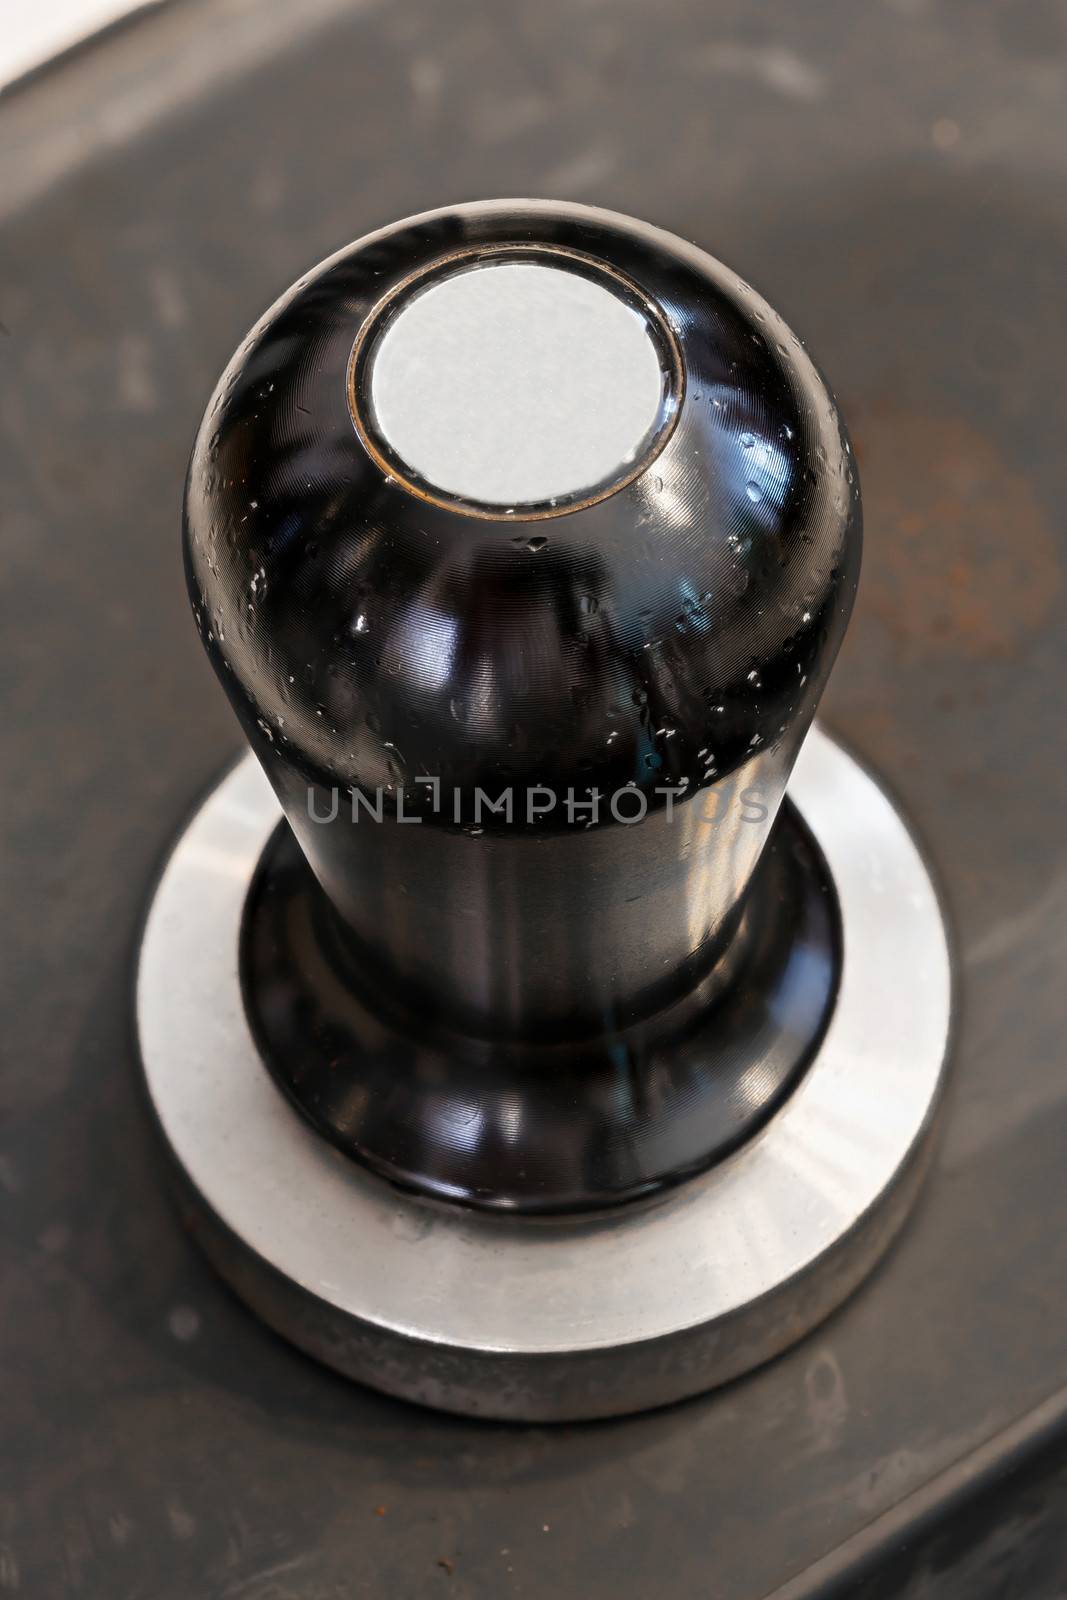 Old and stained stainless steel coffee tamper on rubber sheet